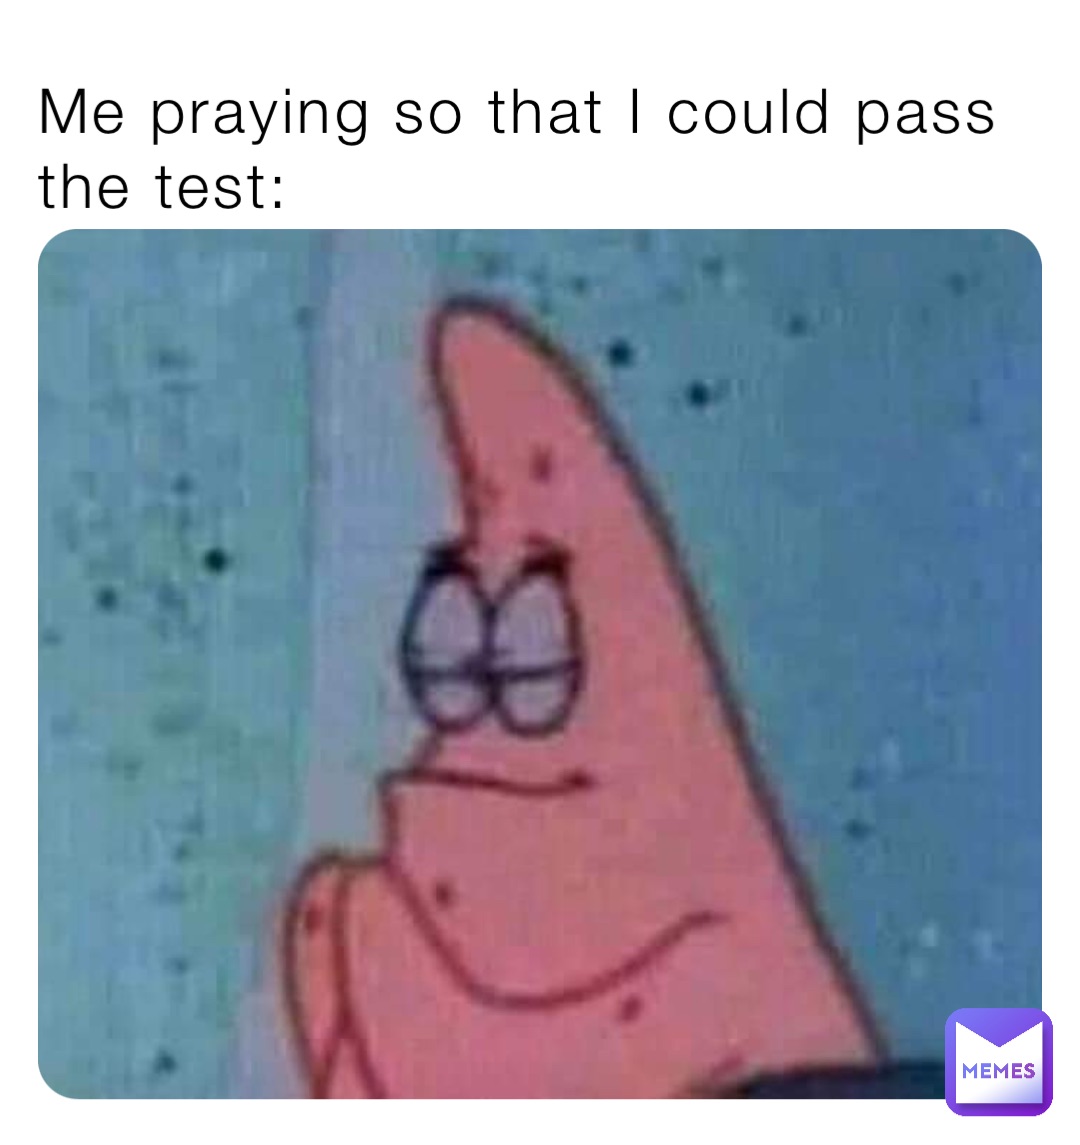 Me praying so that I could pass the test: